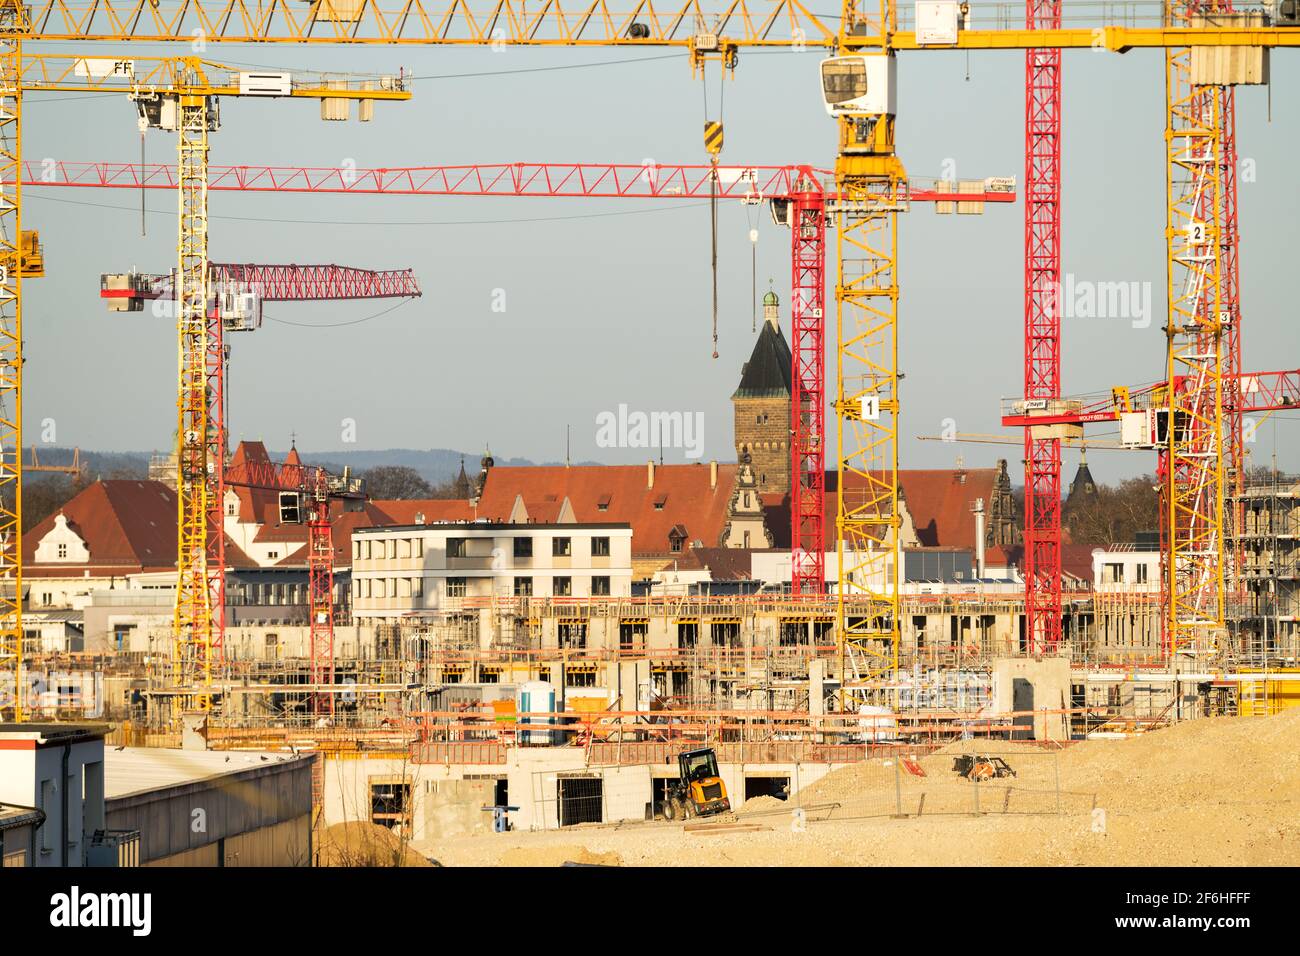 Cranes on the large construction site, a new district is being built. Major construction project. investment real estate Stock Photo